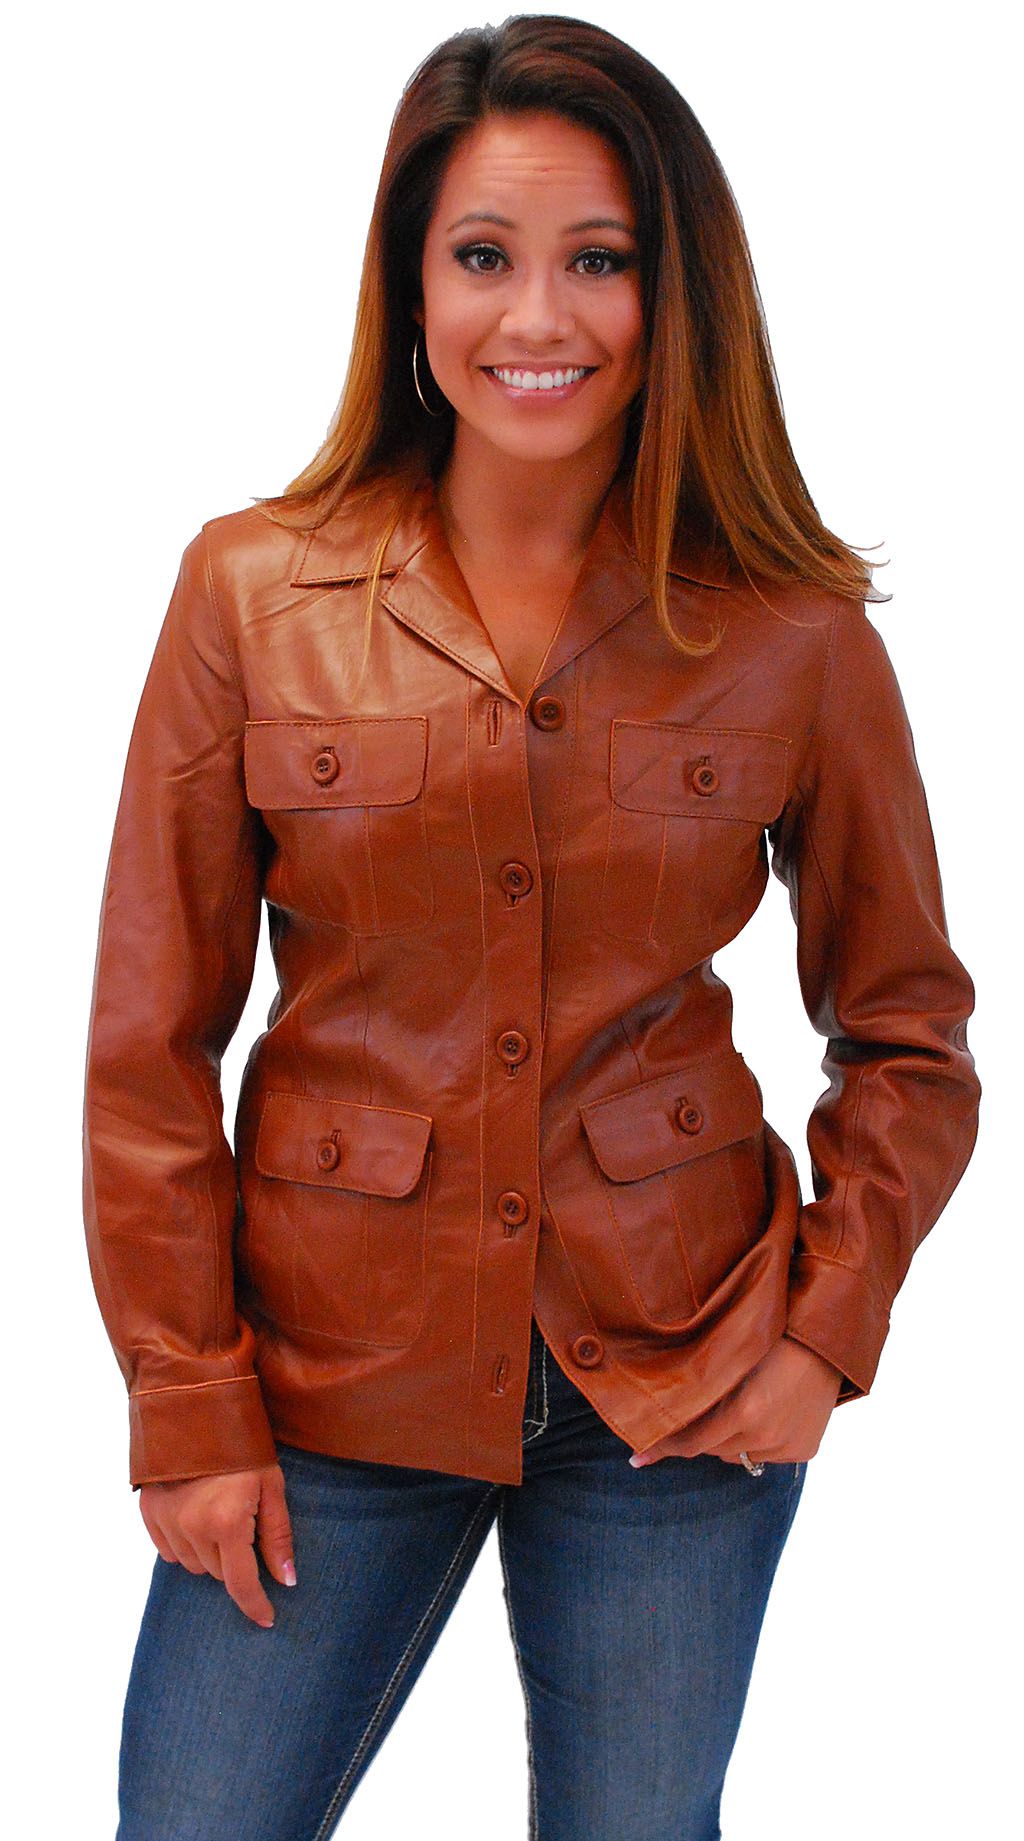 woman wearing a brown button up coat